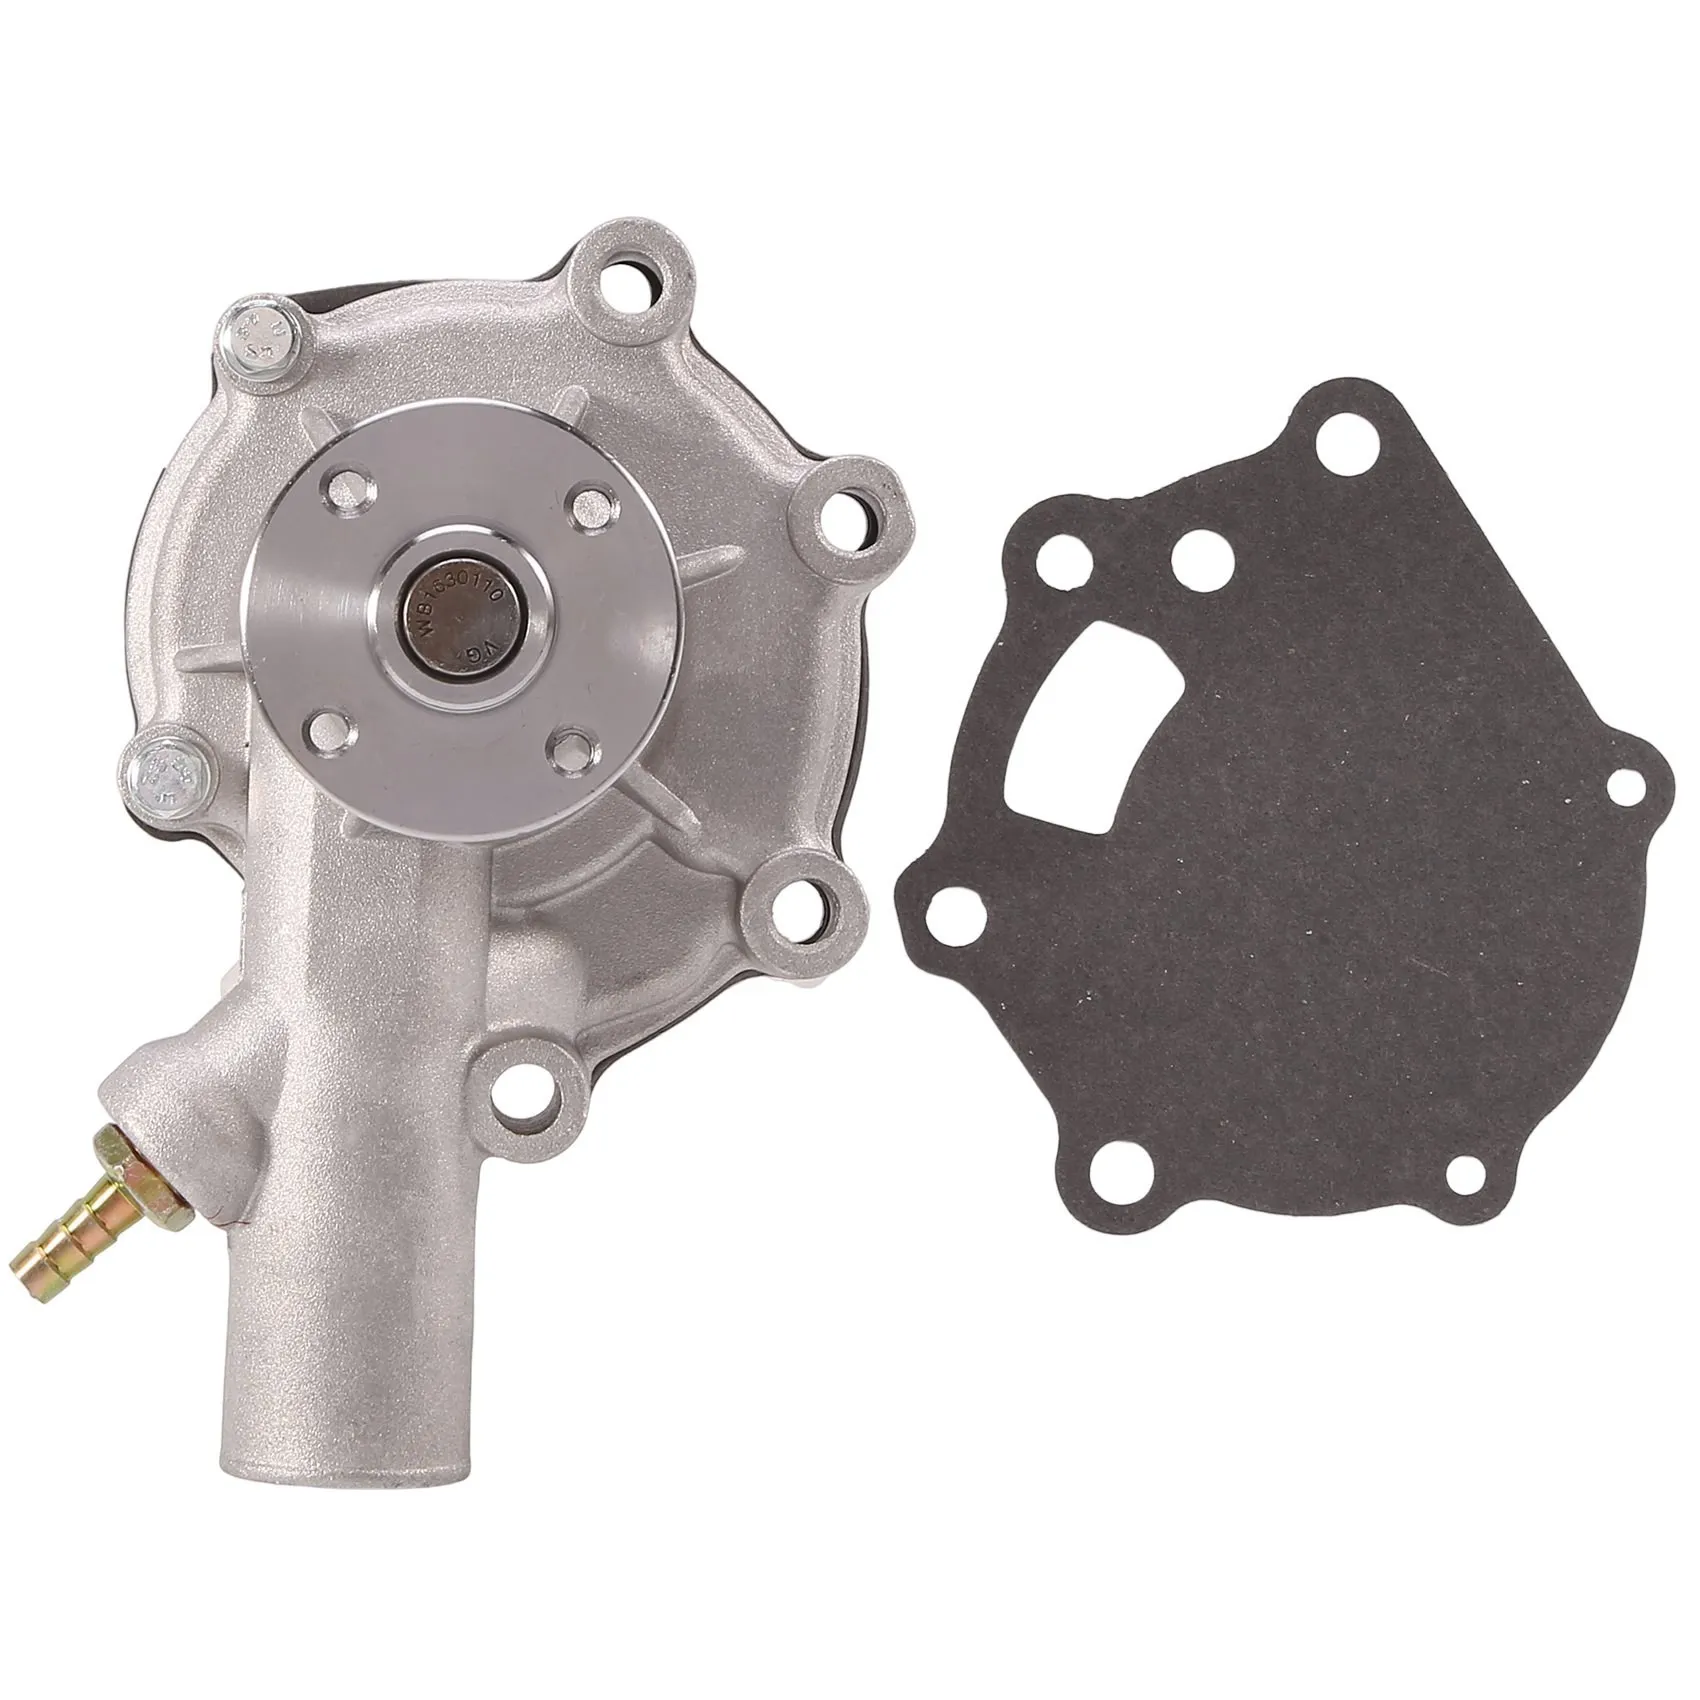 

Engine Parts Water Pump for Mitsubishi S4L S3L S3L2 K3B K3C K3D K3E K4F Hoflader Terex Iseki with Gasket MM409302